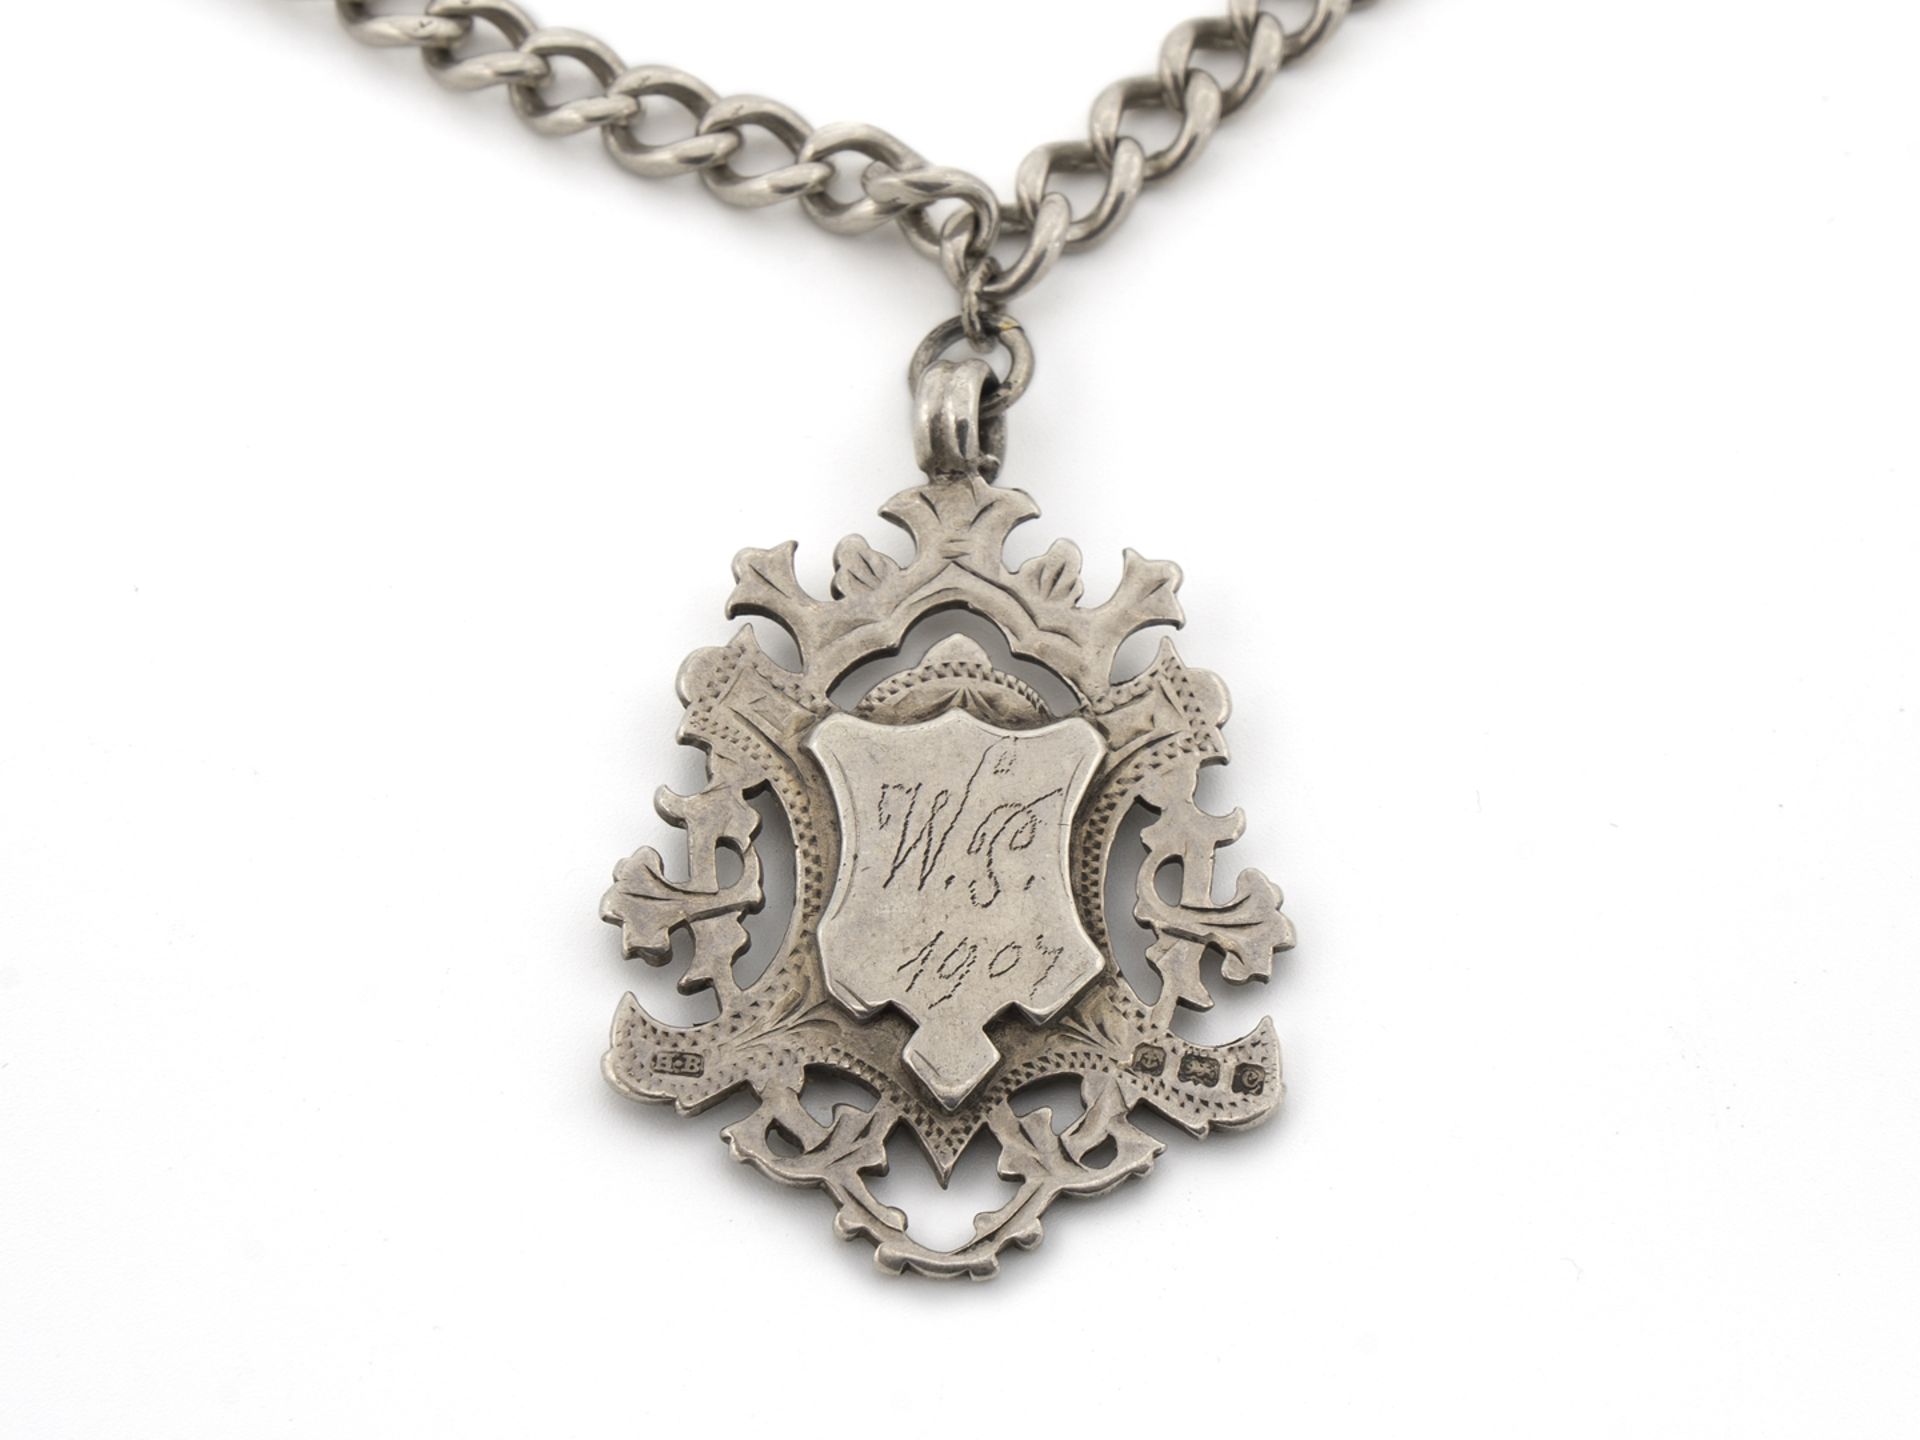 Watch chain sterling silver, Birmingham England, dated 1907 - Image 2 of 4